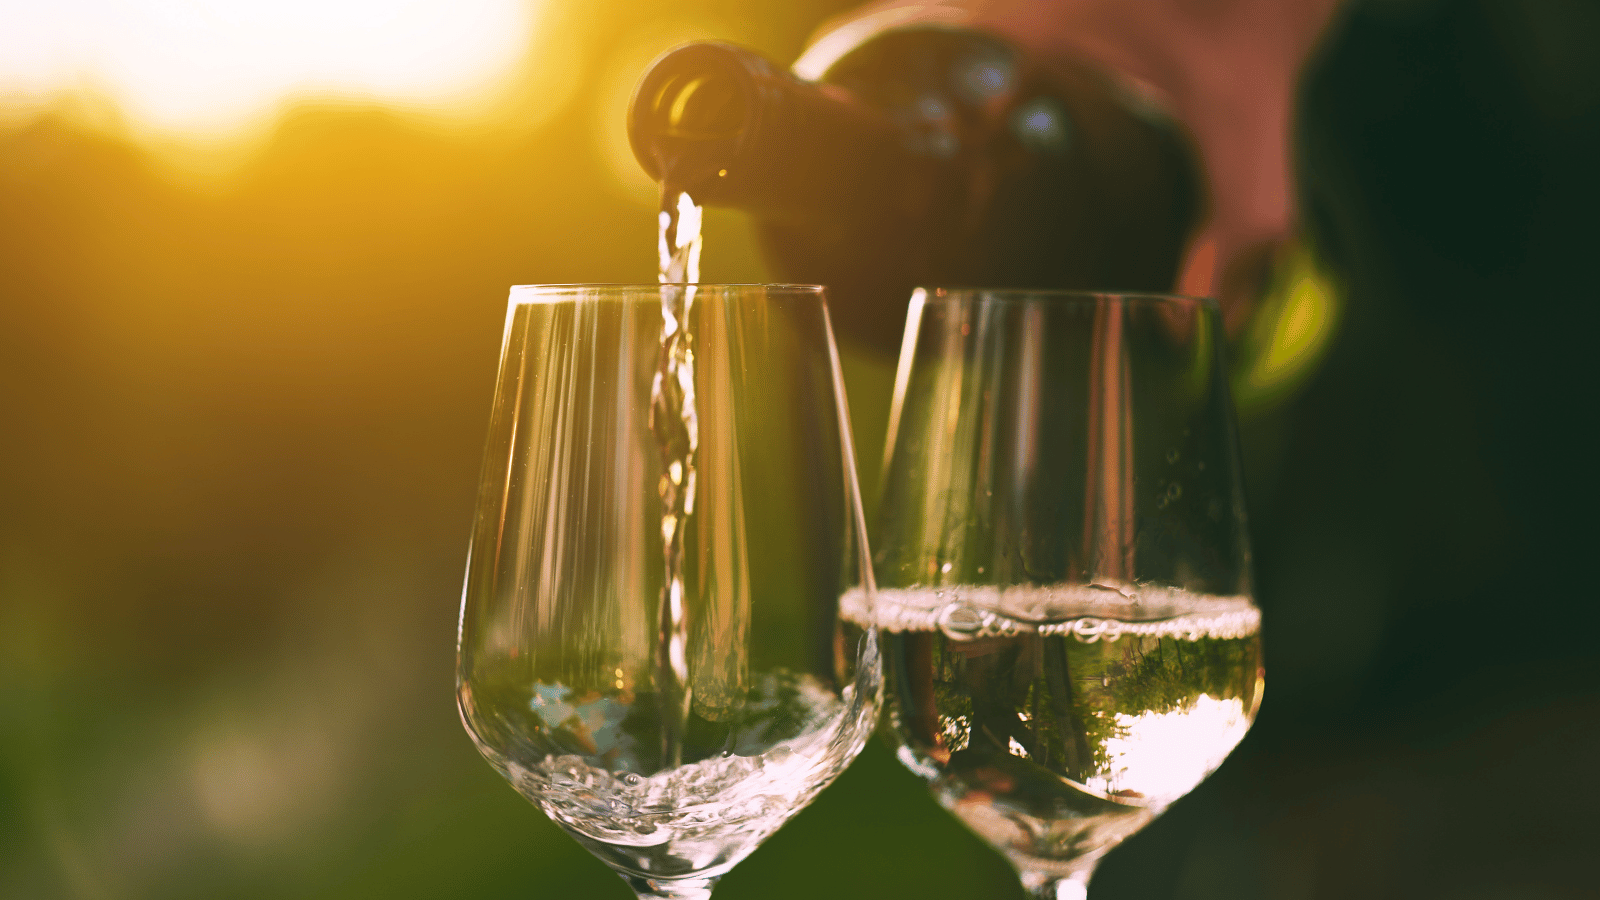 Two glasses in close up. One has half glass of white wine while wine bottle pours white wine in the other glass. Sunset is in the background.